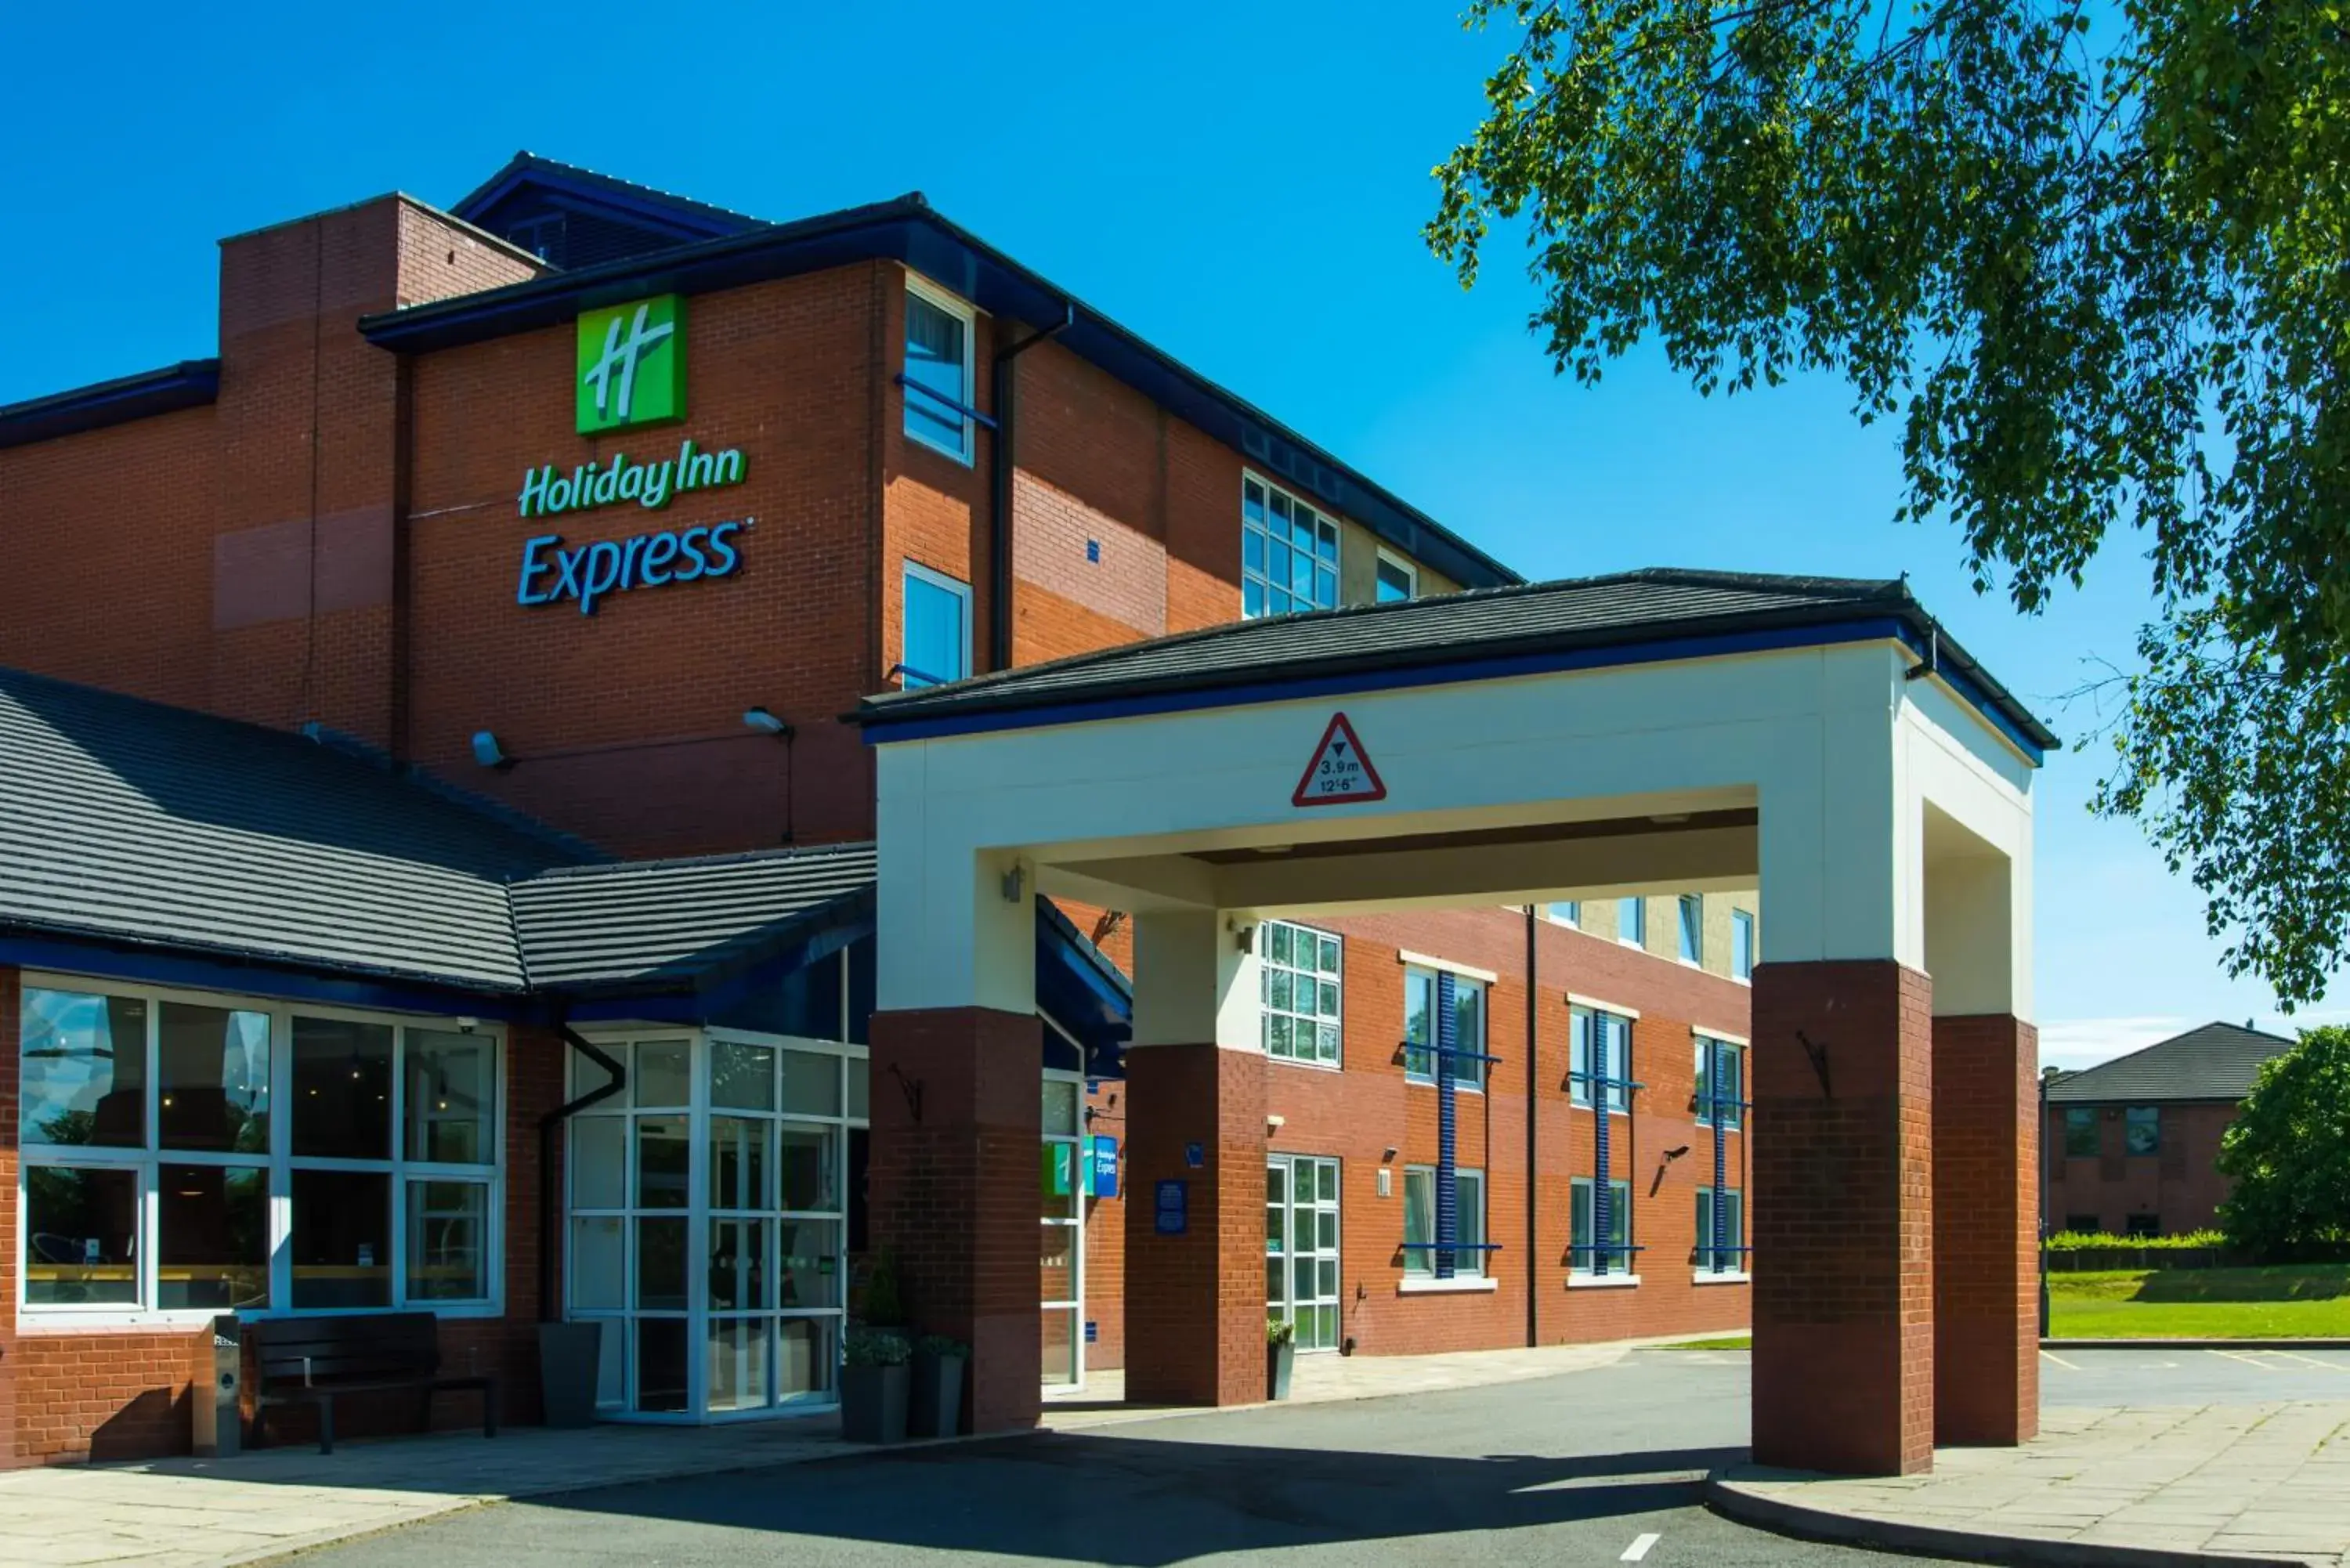 Property building in Holiday Inn Express Burton On Trent